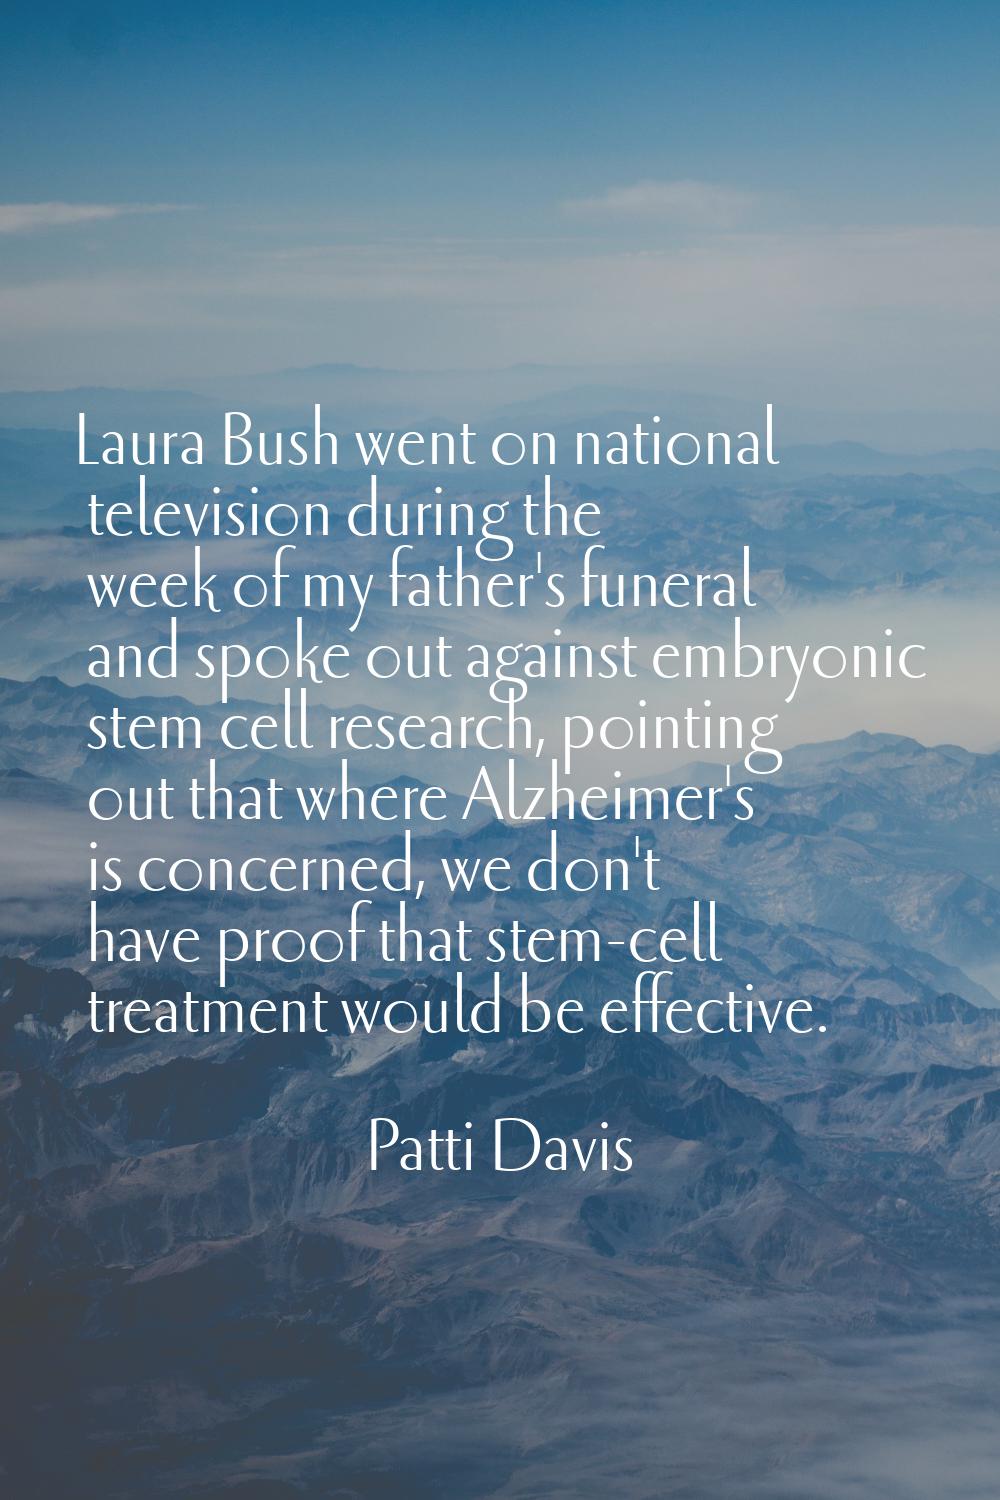 Laura Bush went on national television during the week of my father's funeral and spoke out against